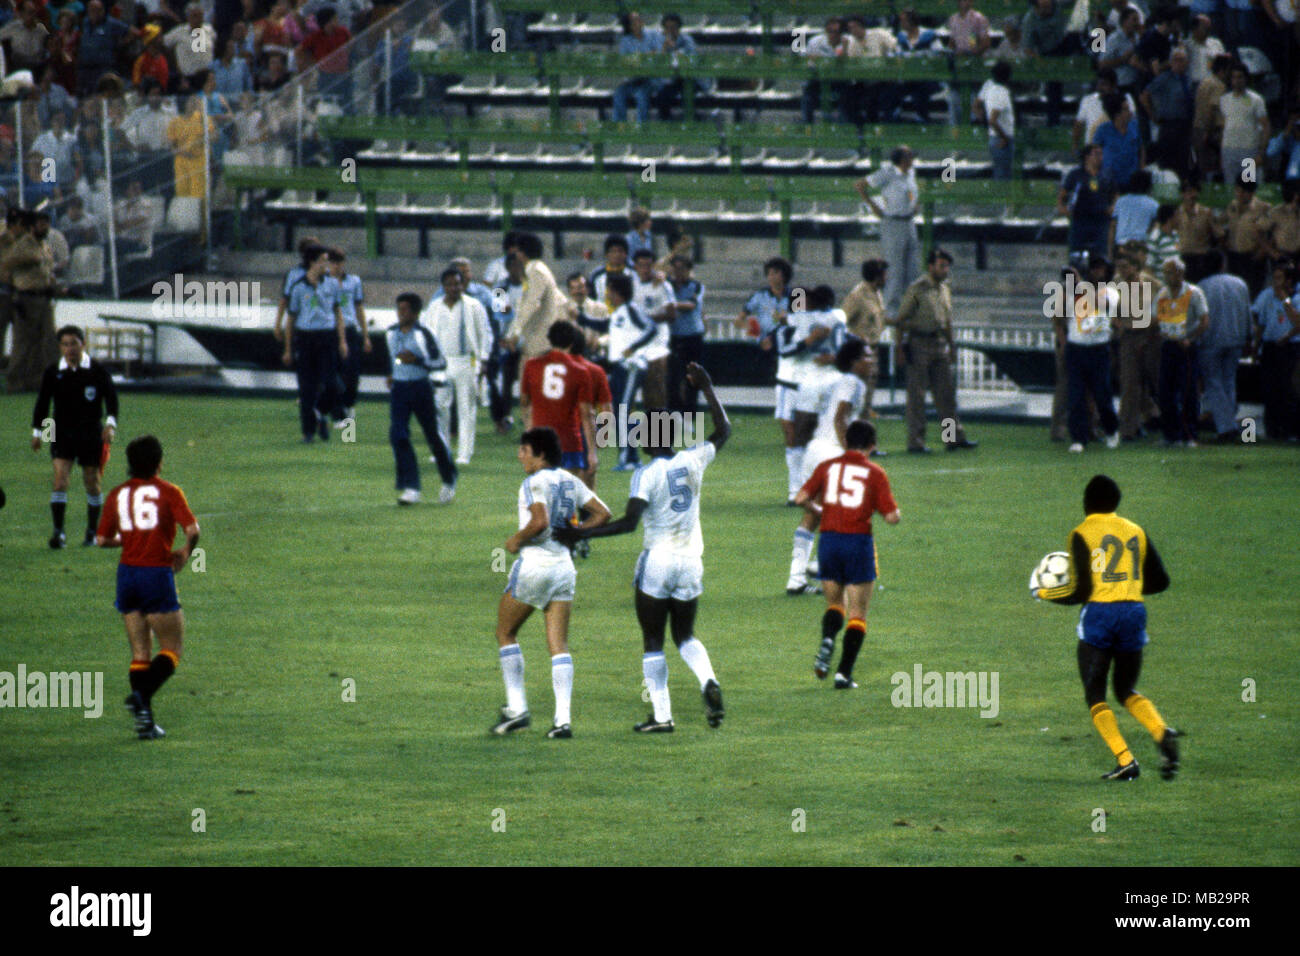 FIFA World Cup - Espana 1982 (Spain 1982) 16.6.1982, Estadio Luis Casanova, Valencia. FIFA World Cup 1982, Group 5: Spain v Honduras. Honduras celebrate the 1-1 draw as a win at the end of the match. In the middle scorer Htor Zelaya (15) & Allan Costly (5). Goalkeeper Julio Car Arzu carries the matchball. Stock Photo